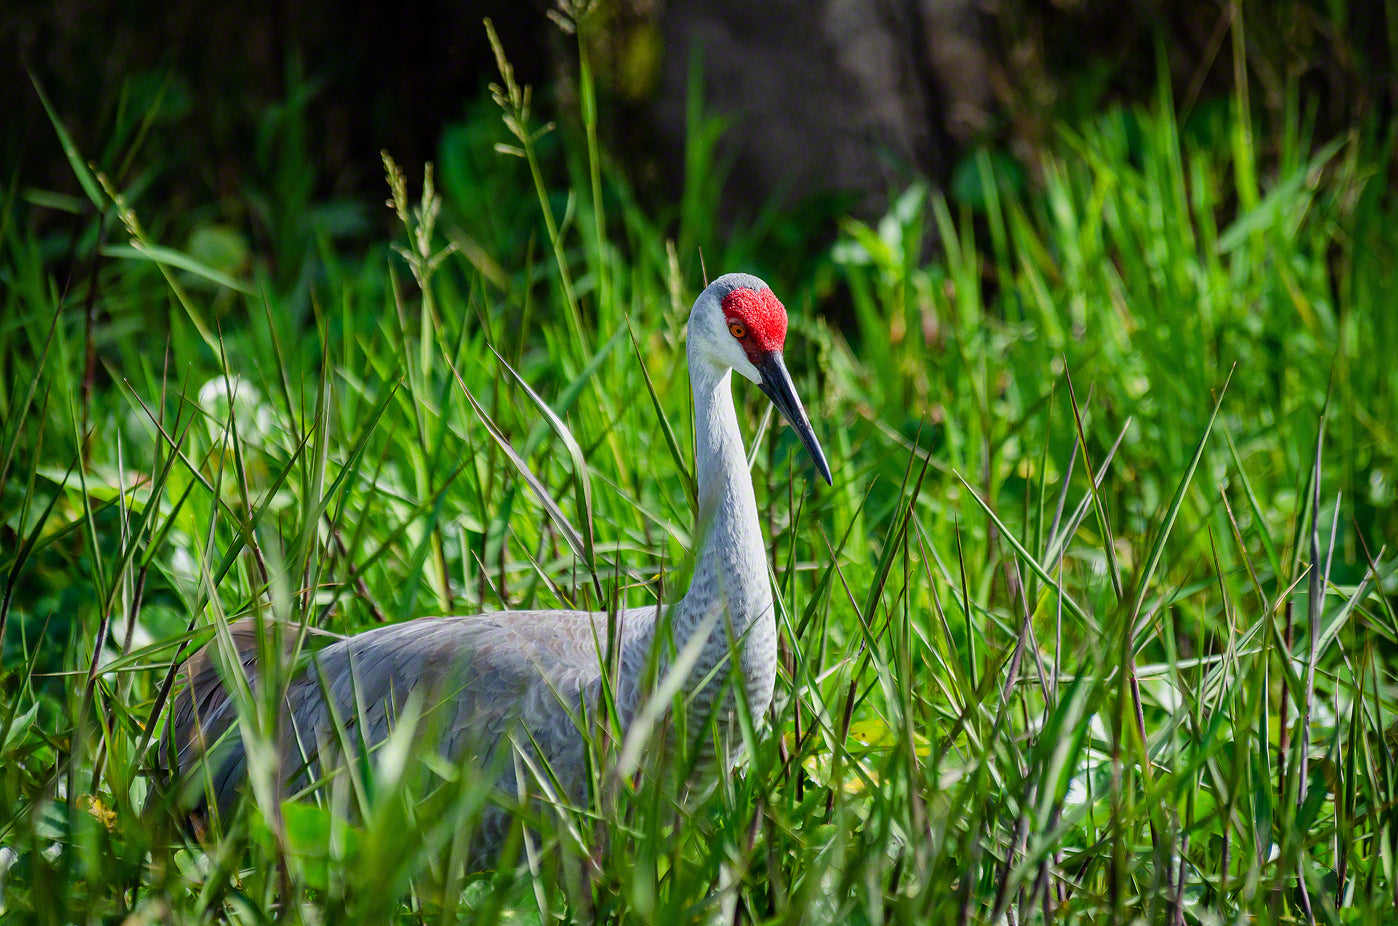 A photograph of a Sandhill Crane in the marsh